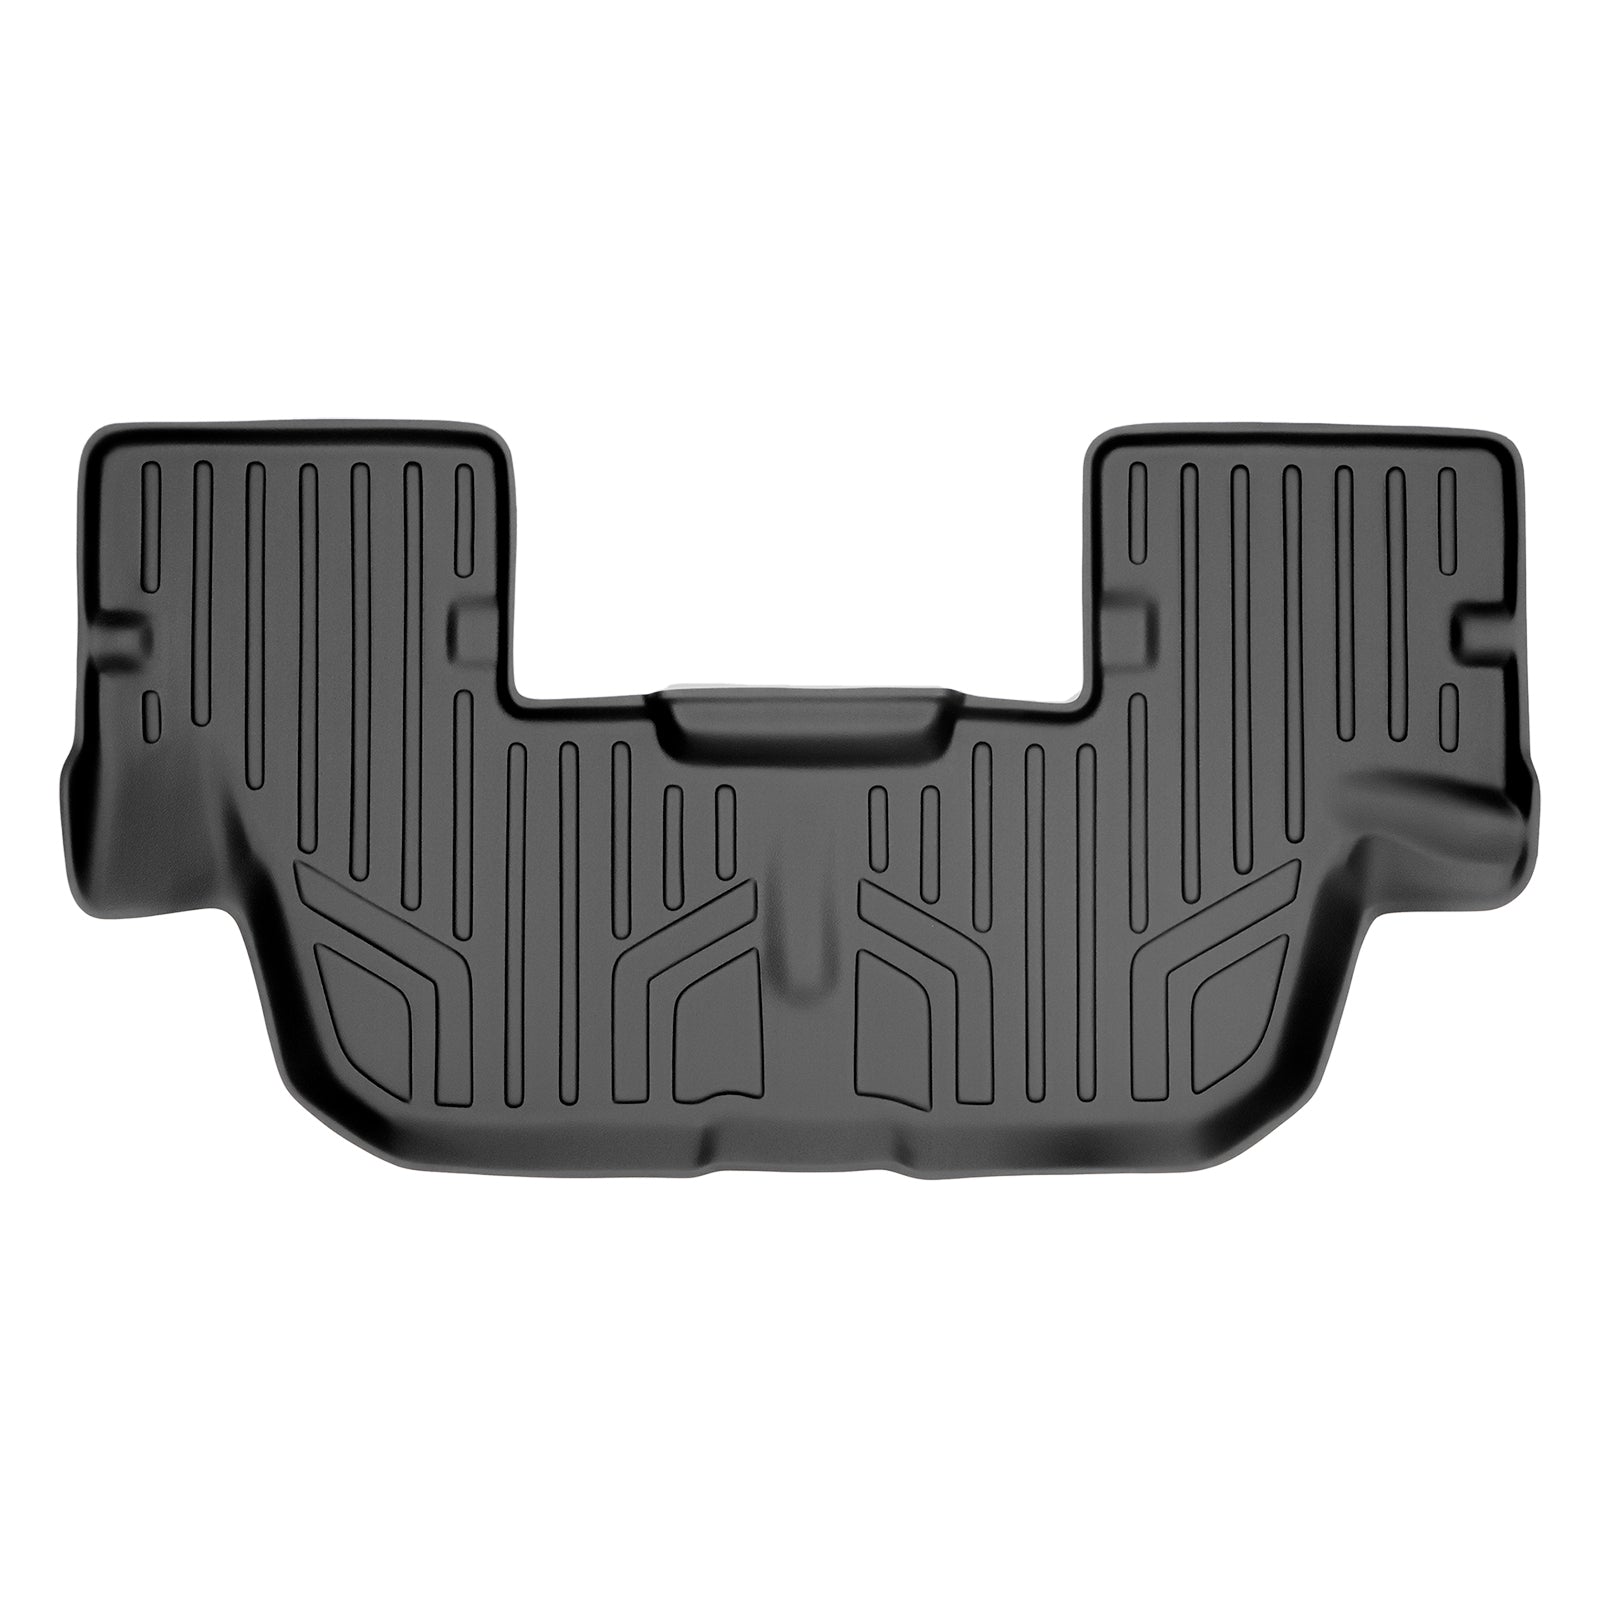 SMARTLINER Custom Fit for 2015-2016 Ford Explorer with 2nd Row Center Console - Smartliner USA